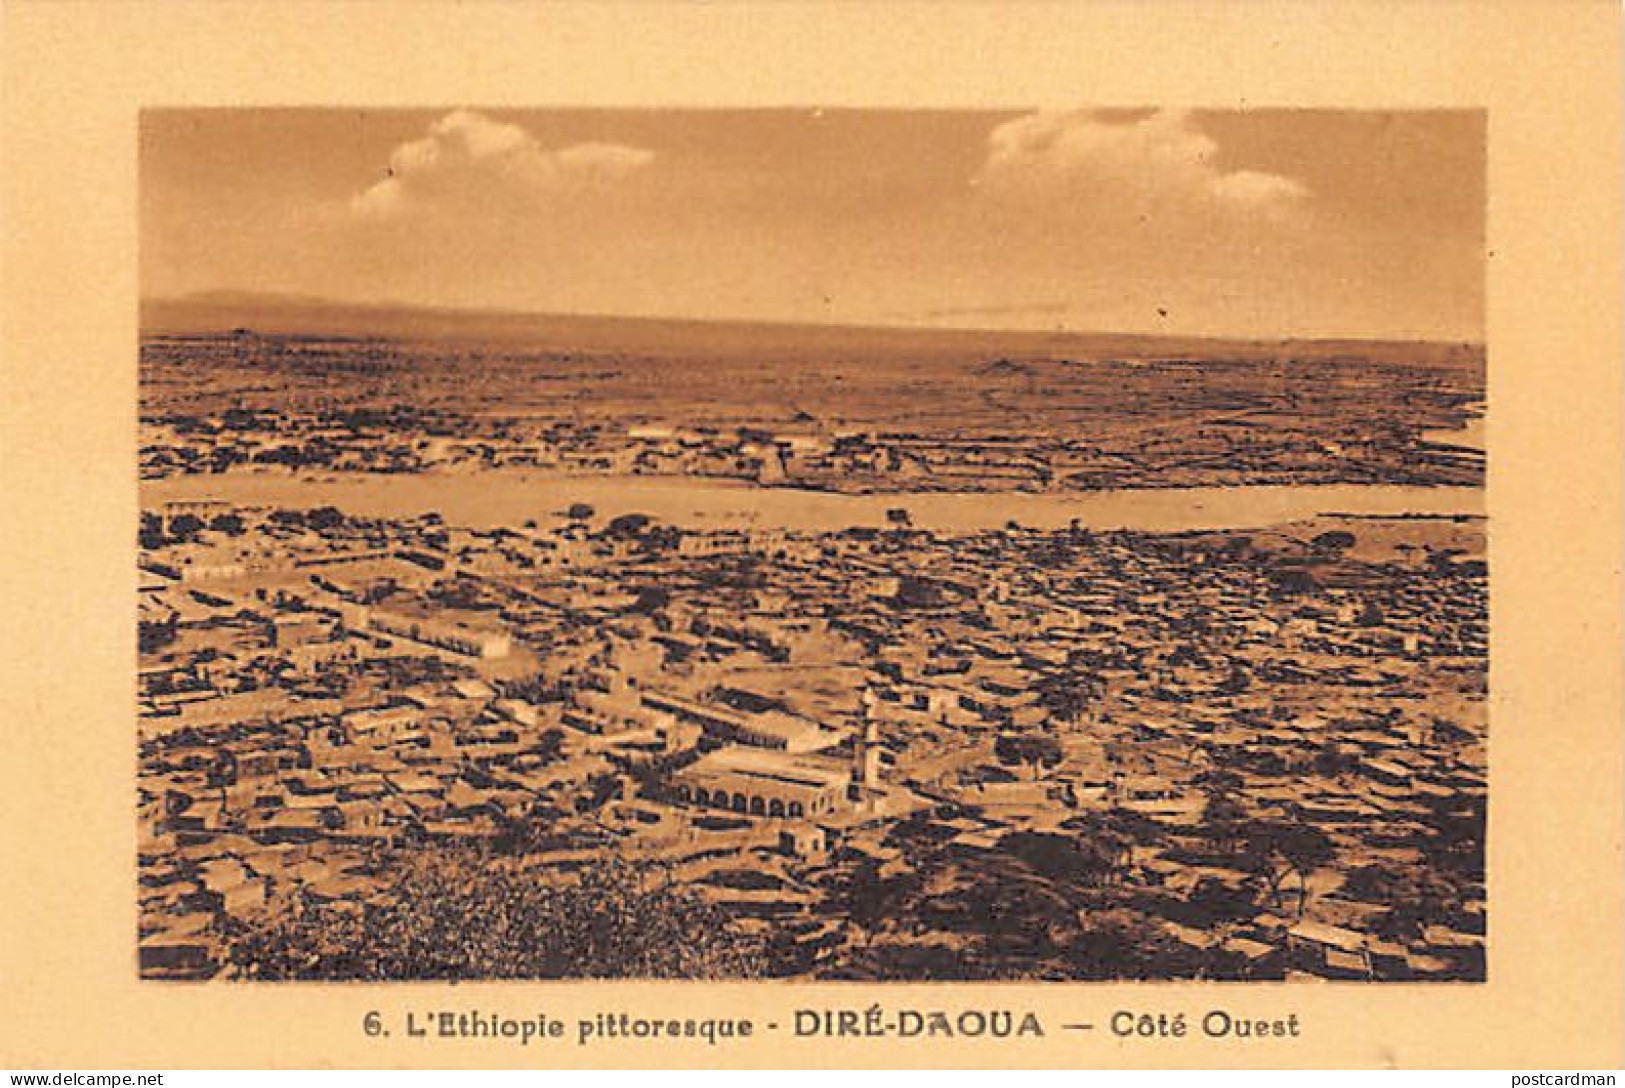 Ethiopia - DIRE DAWA - General View Of The West Side - Publ. Printing Works Of The Dire Dawa Catholic Mission - Photogra - Ethiopie